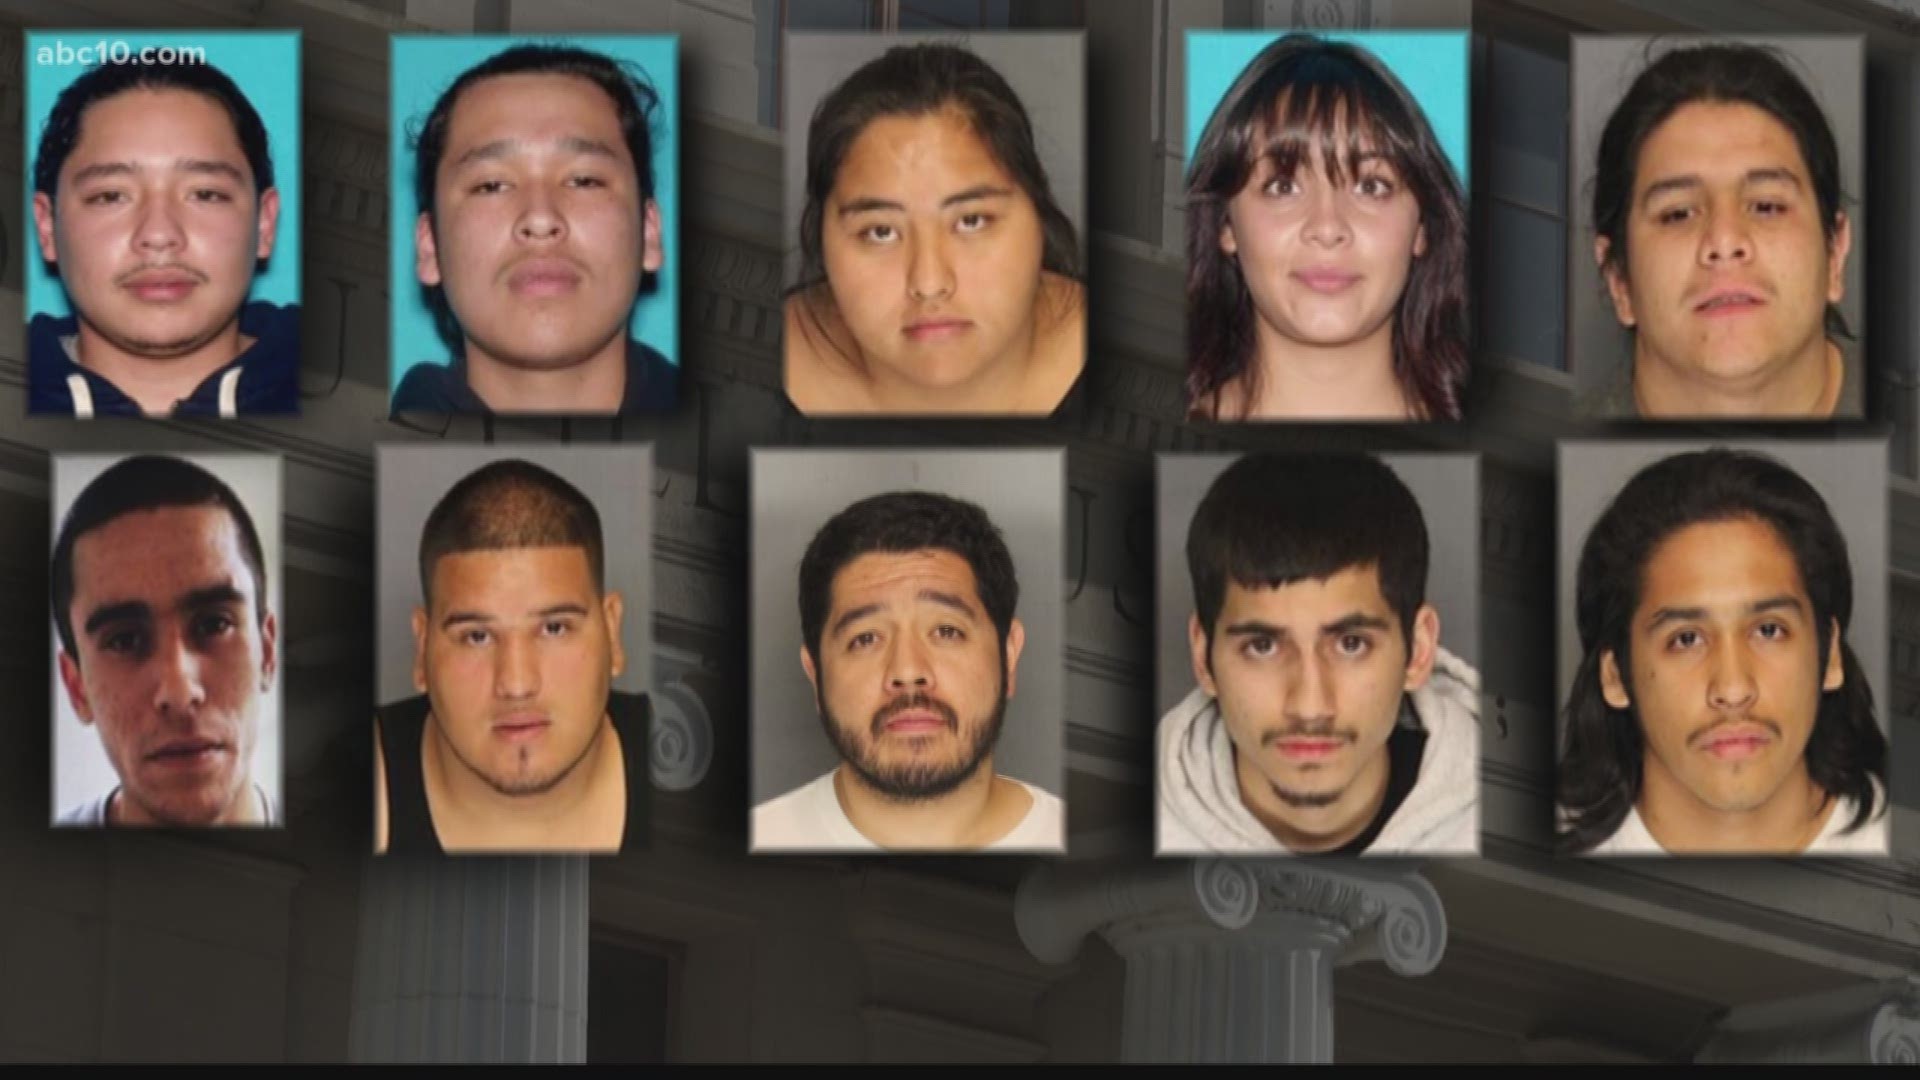 The Stockton Police Department, along with other agencies, has concluded a nine-month-long criminal gang investigation into several shootings, including multiple homicides within the city of Stockton and San Joaquin County.